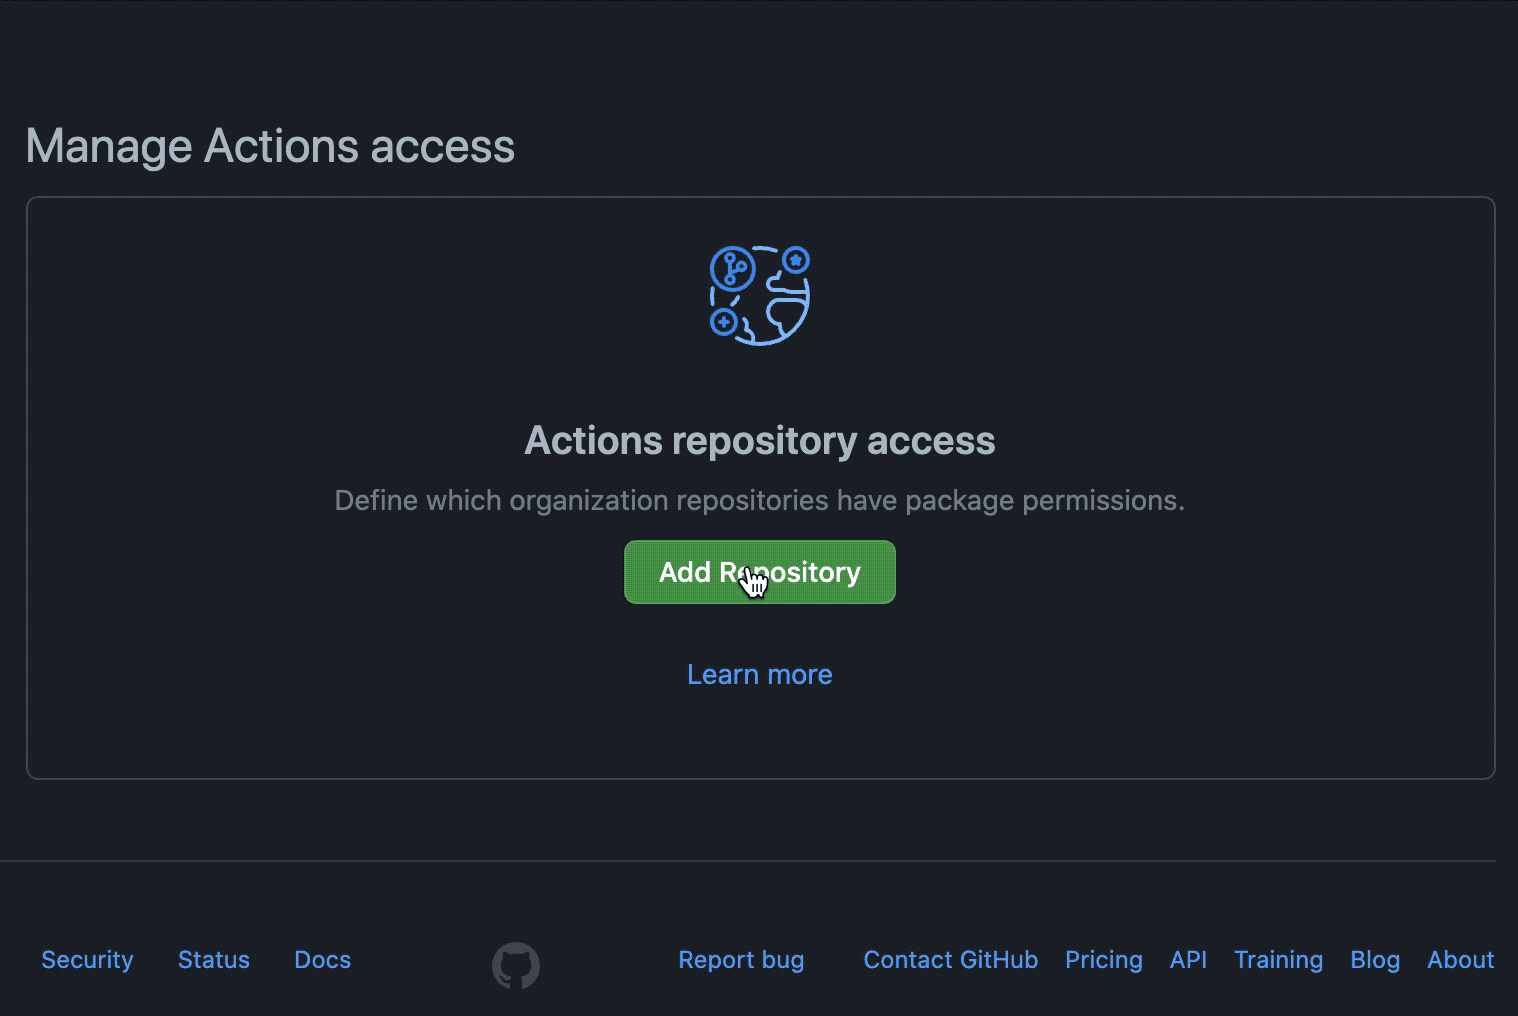 manage actions access animation